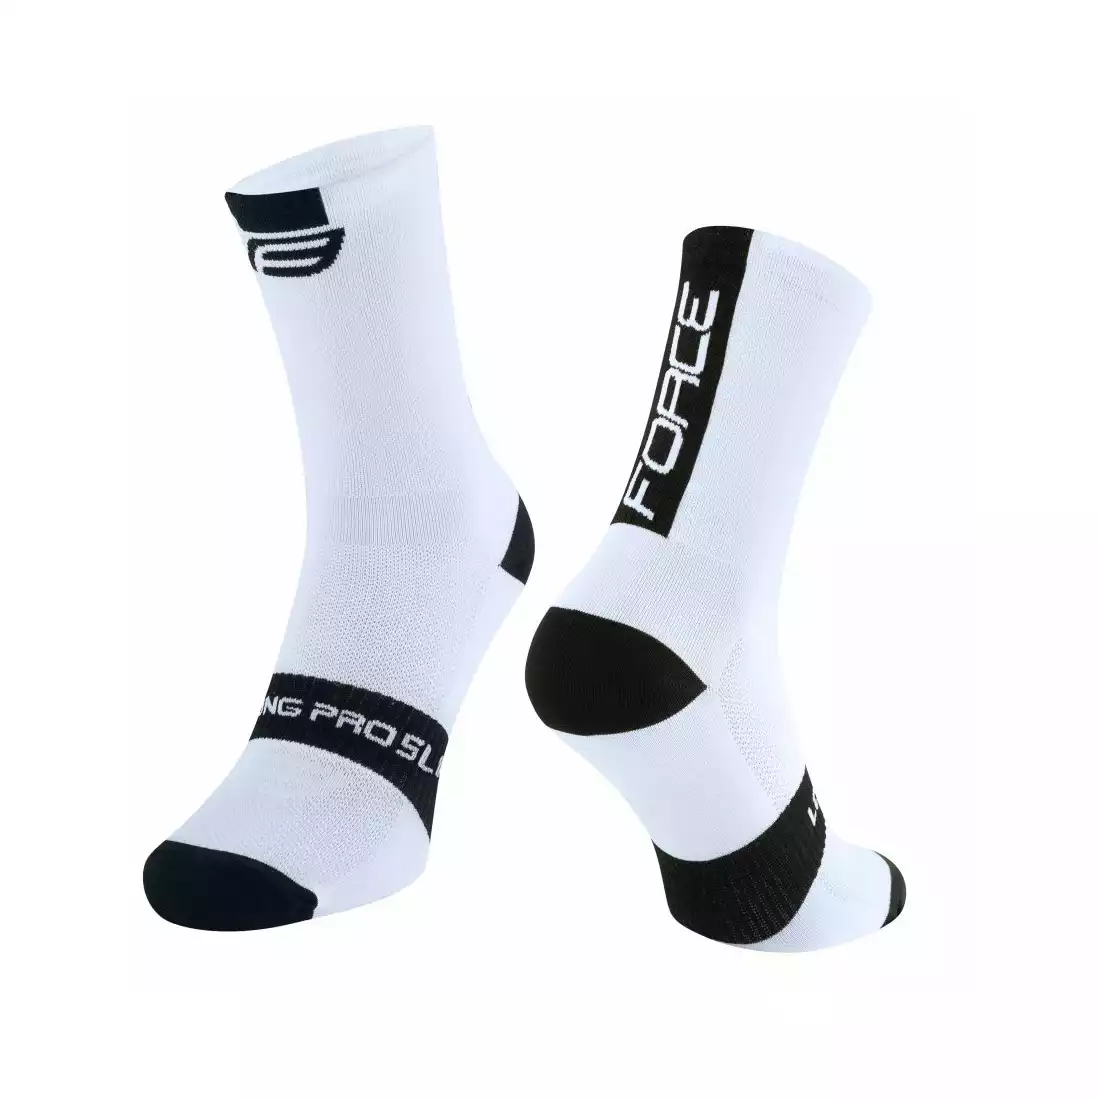 FORCE LONG PRO SLIM cycling socks, black and white